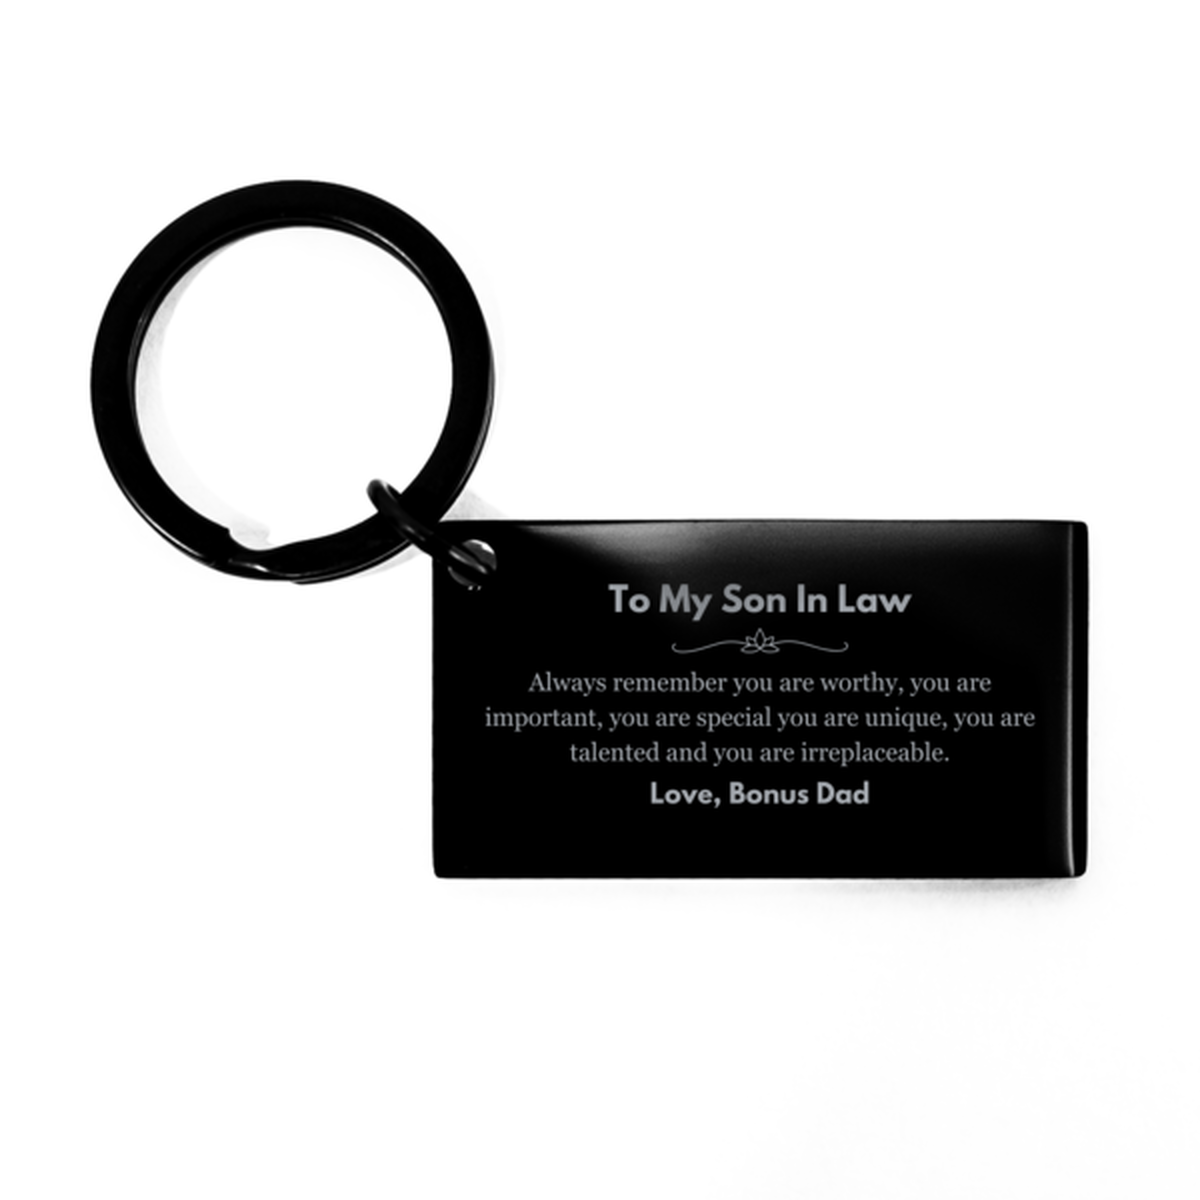 Son In Law Birthday Gifts from Bonus Dad, Inspirational Keychain for Son In Law Christmas Graduation Gifts for Son In Law Always remember you are worthy, you are important. Love, Bonus Dad